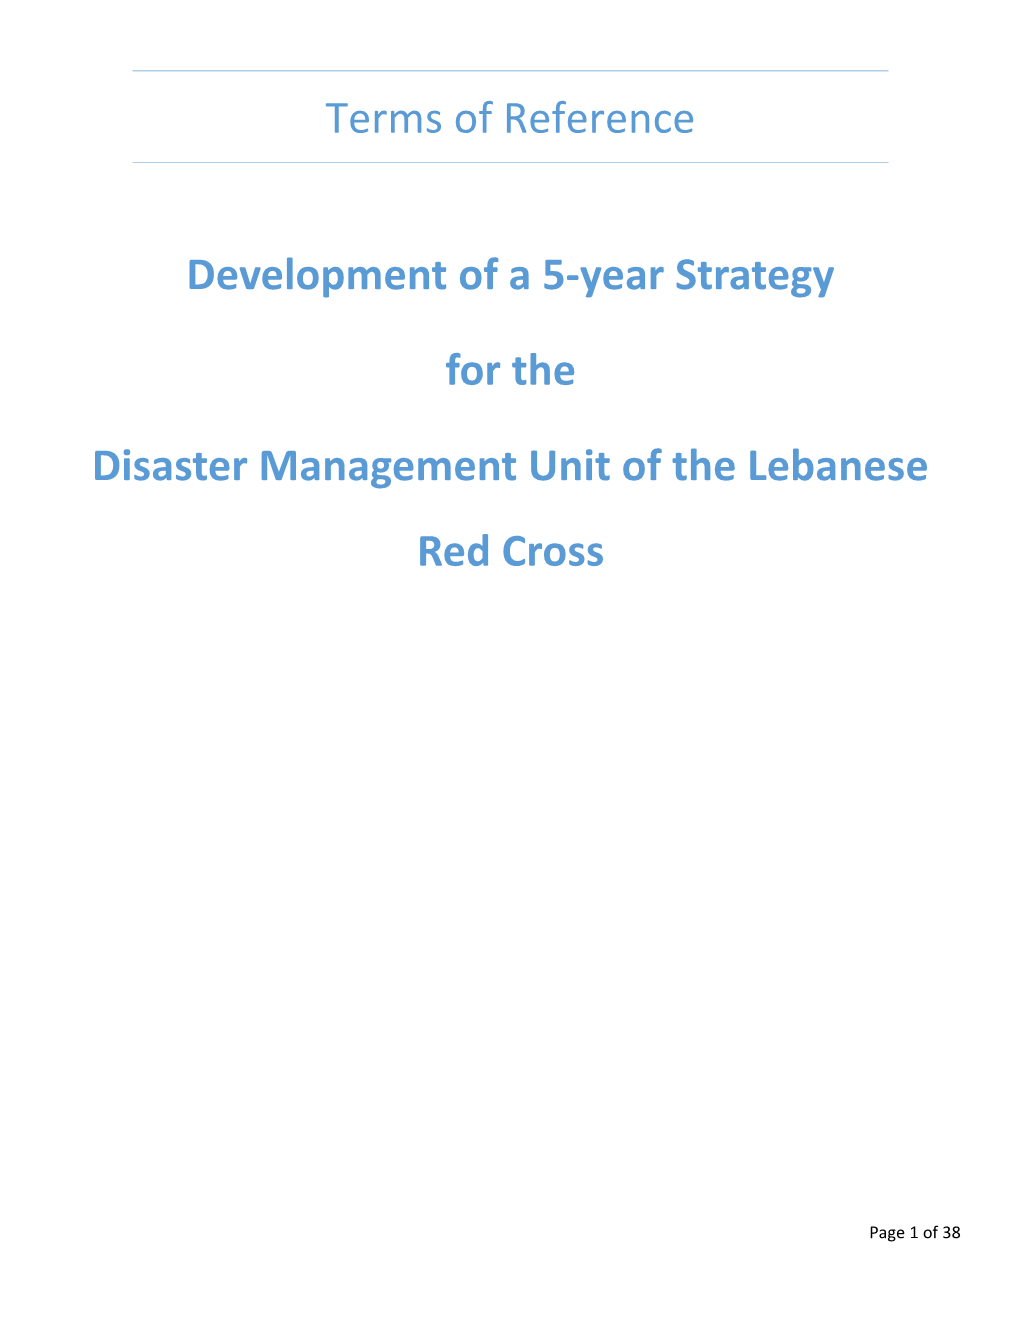 Disaster Management Unit of the Lebanese Red Cross